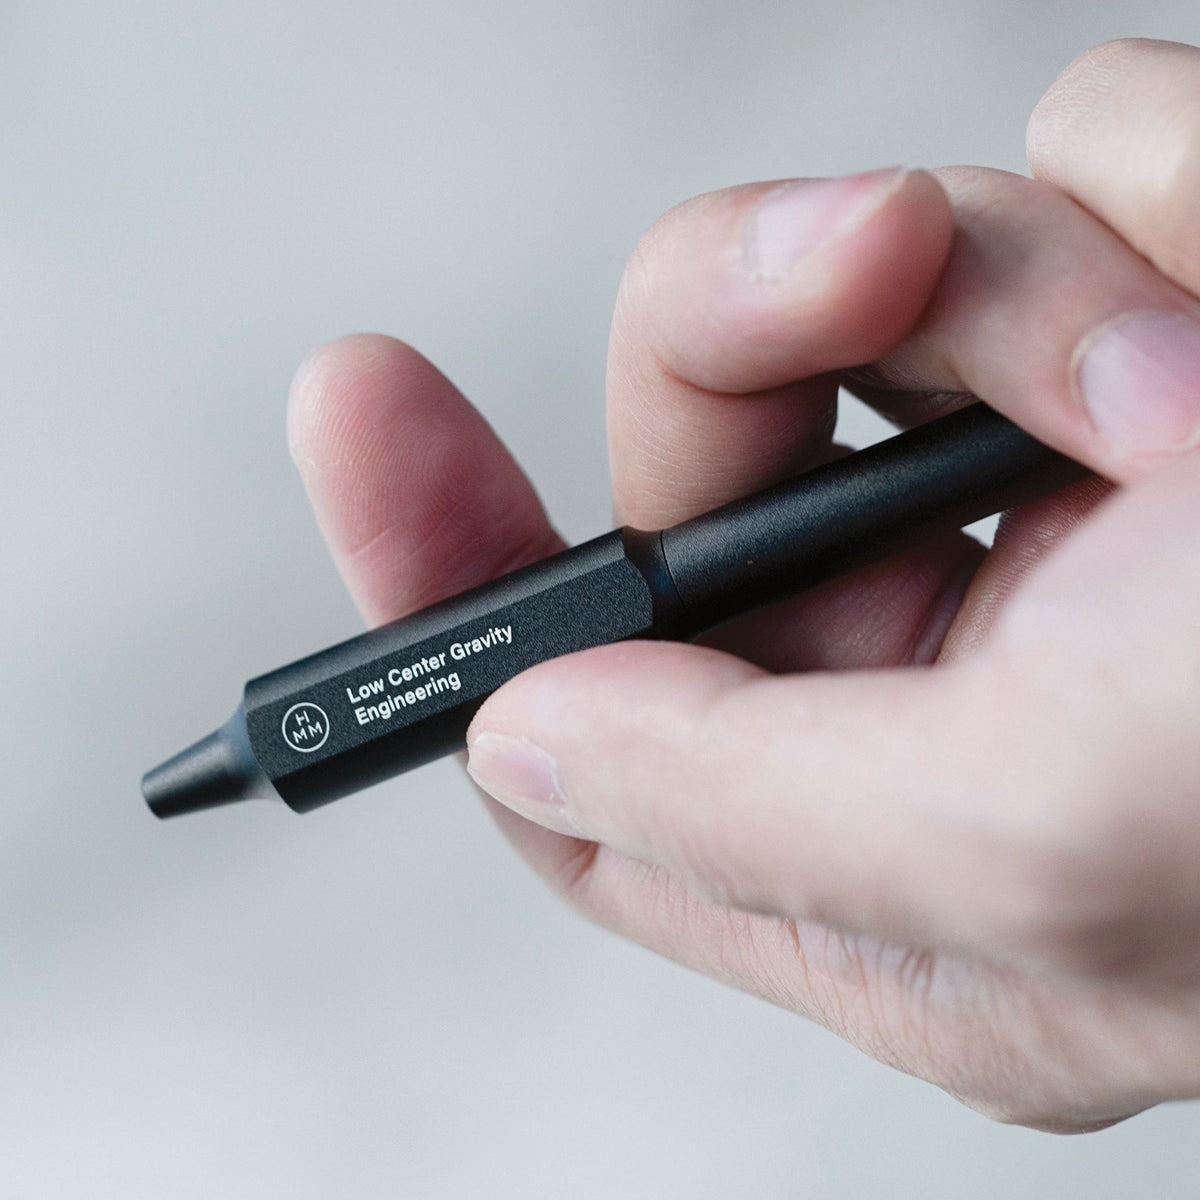 Curva Pen is designed to get you hooked into loving writing again - Yanko  Design